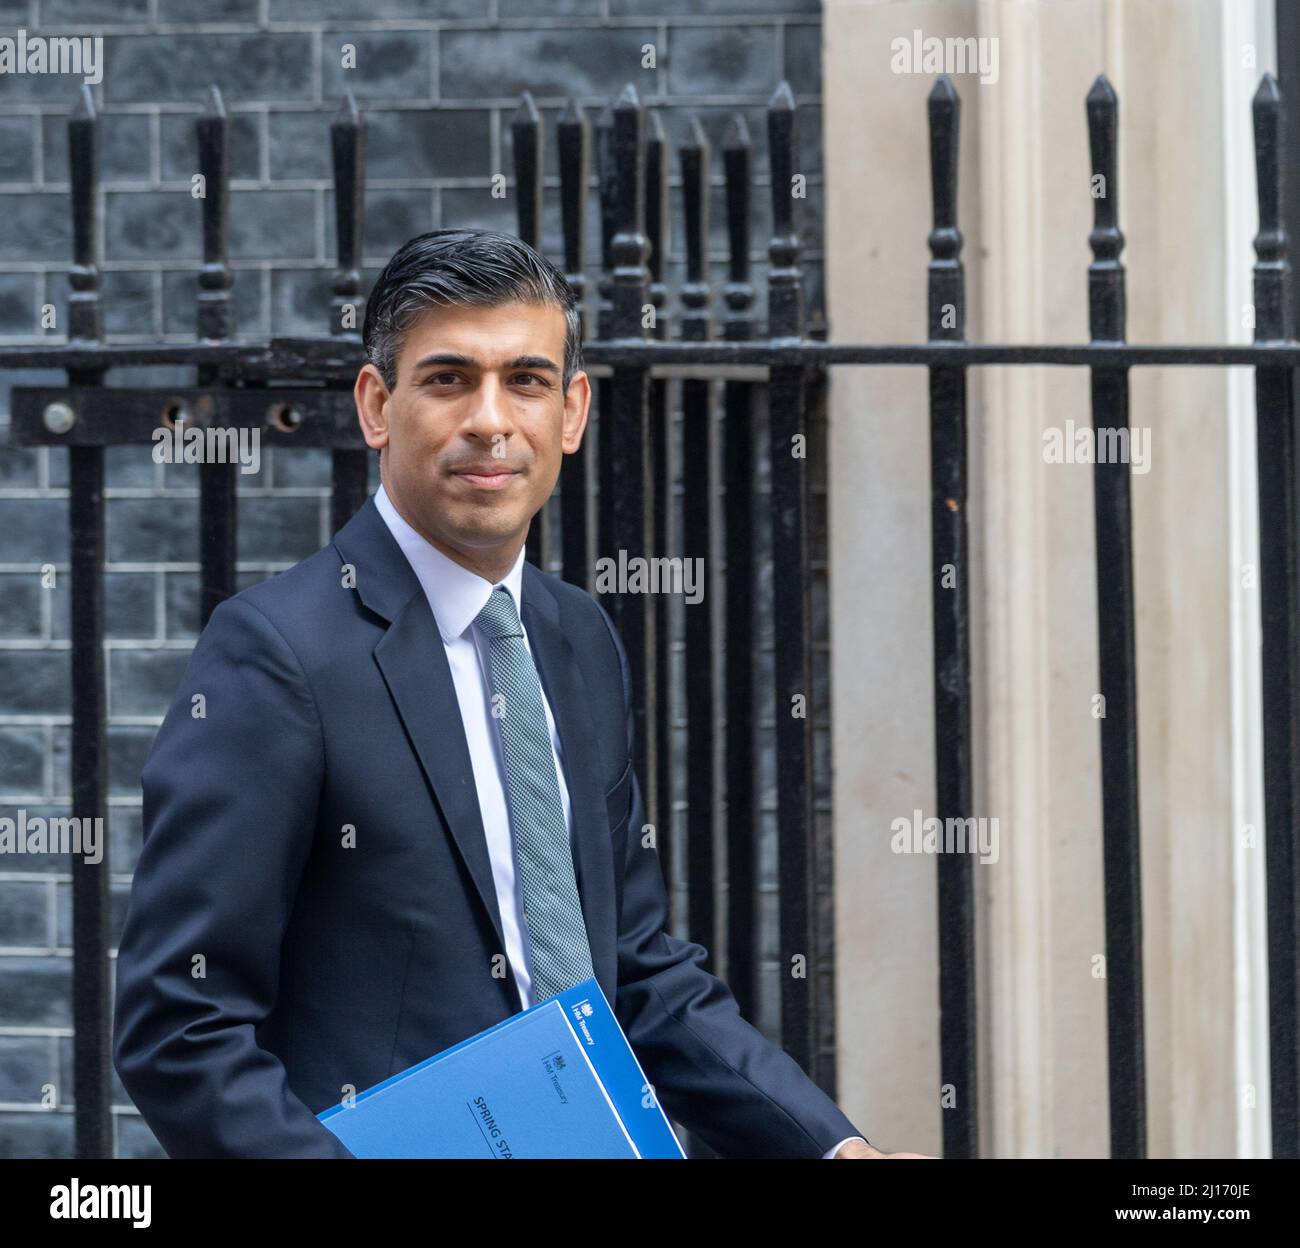 London, UK. 23rd Mar, 2022. 23rd Mar 2022 Rishi Sunak, Chancellor of the Exchequer, leaves 11 Downing Street for the Autumn Statement Credit: Ian Davidson/Alamy Live News Stock Photo